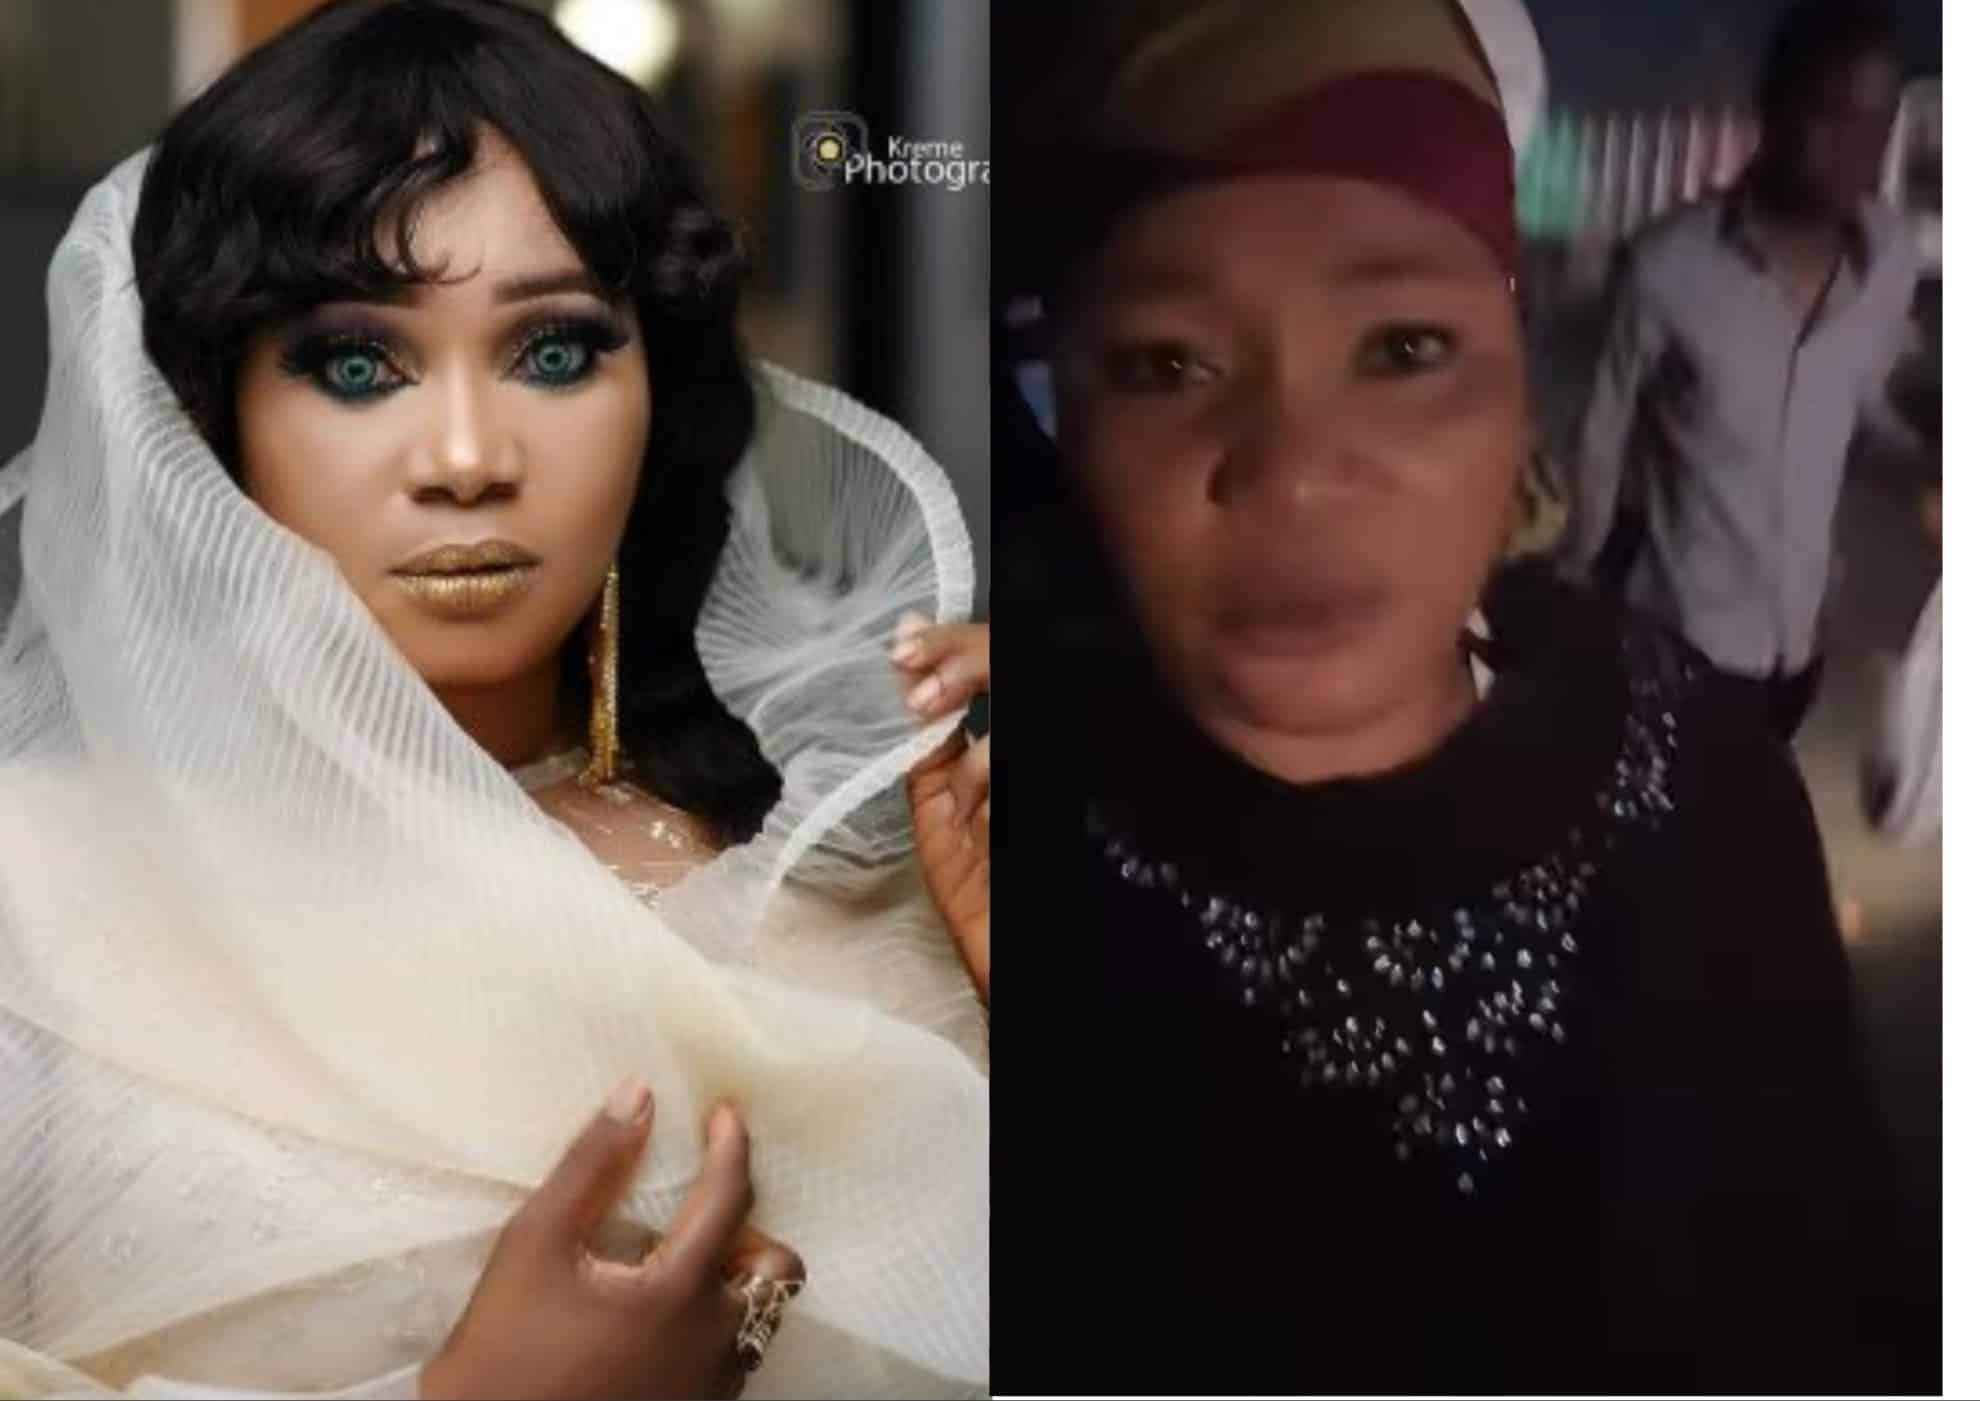 “Sanwo-Olu Must Do Something” - Nollywood Actress Cries Out After Trekking Hours At Midnight